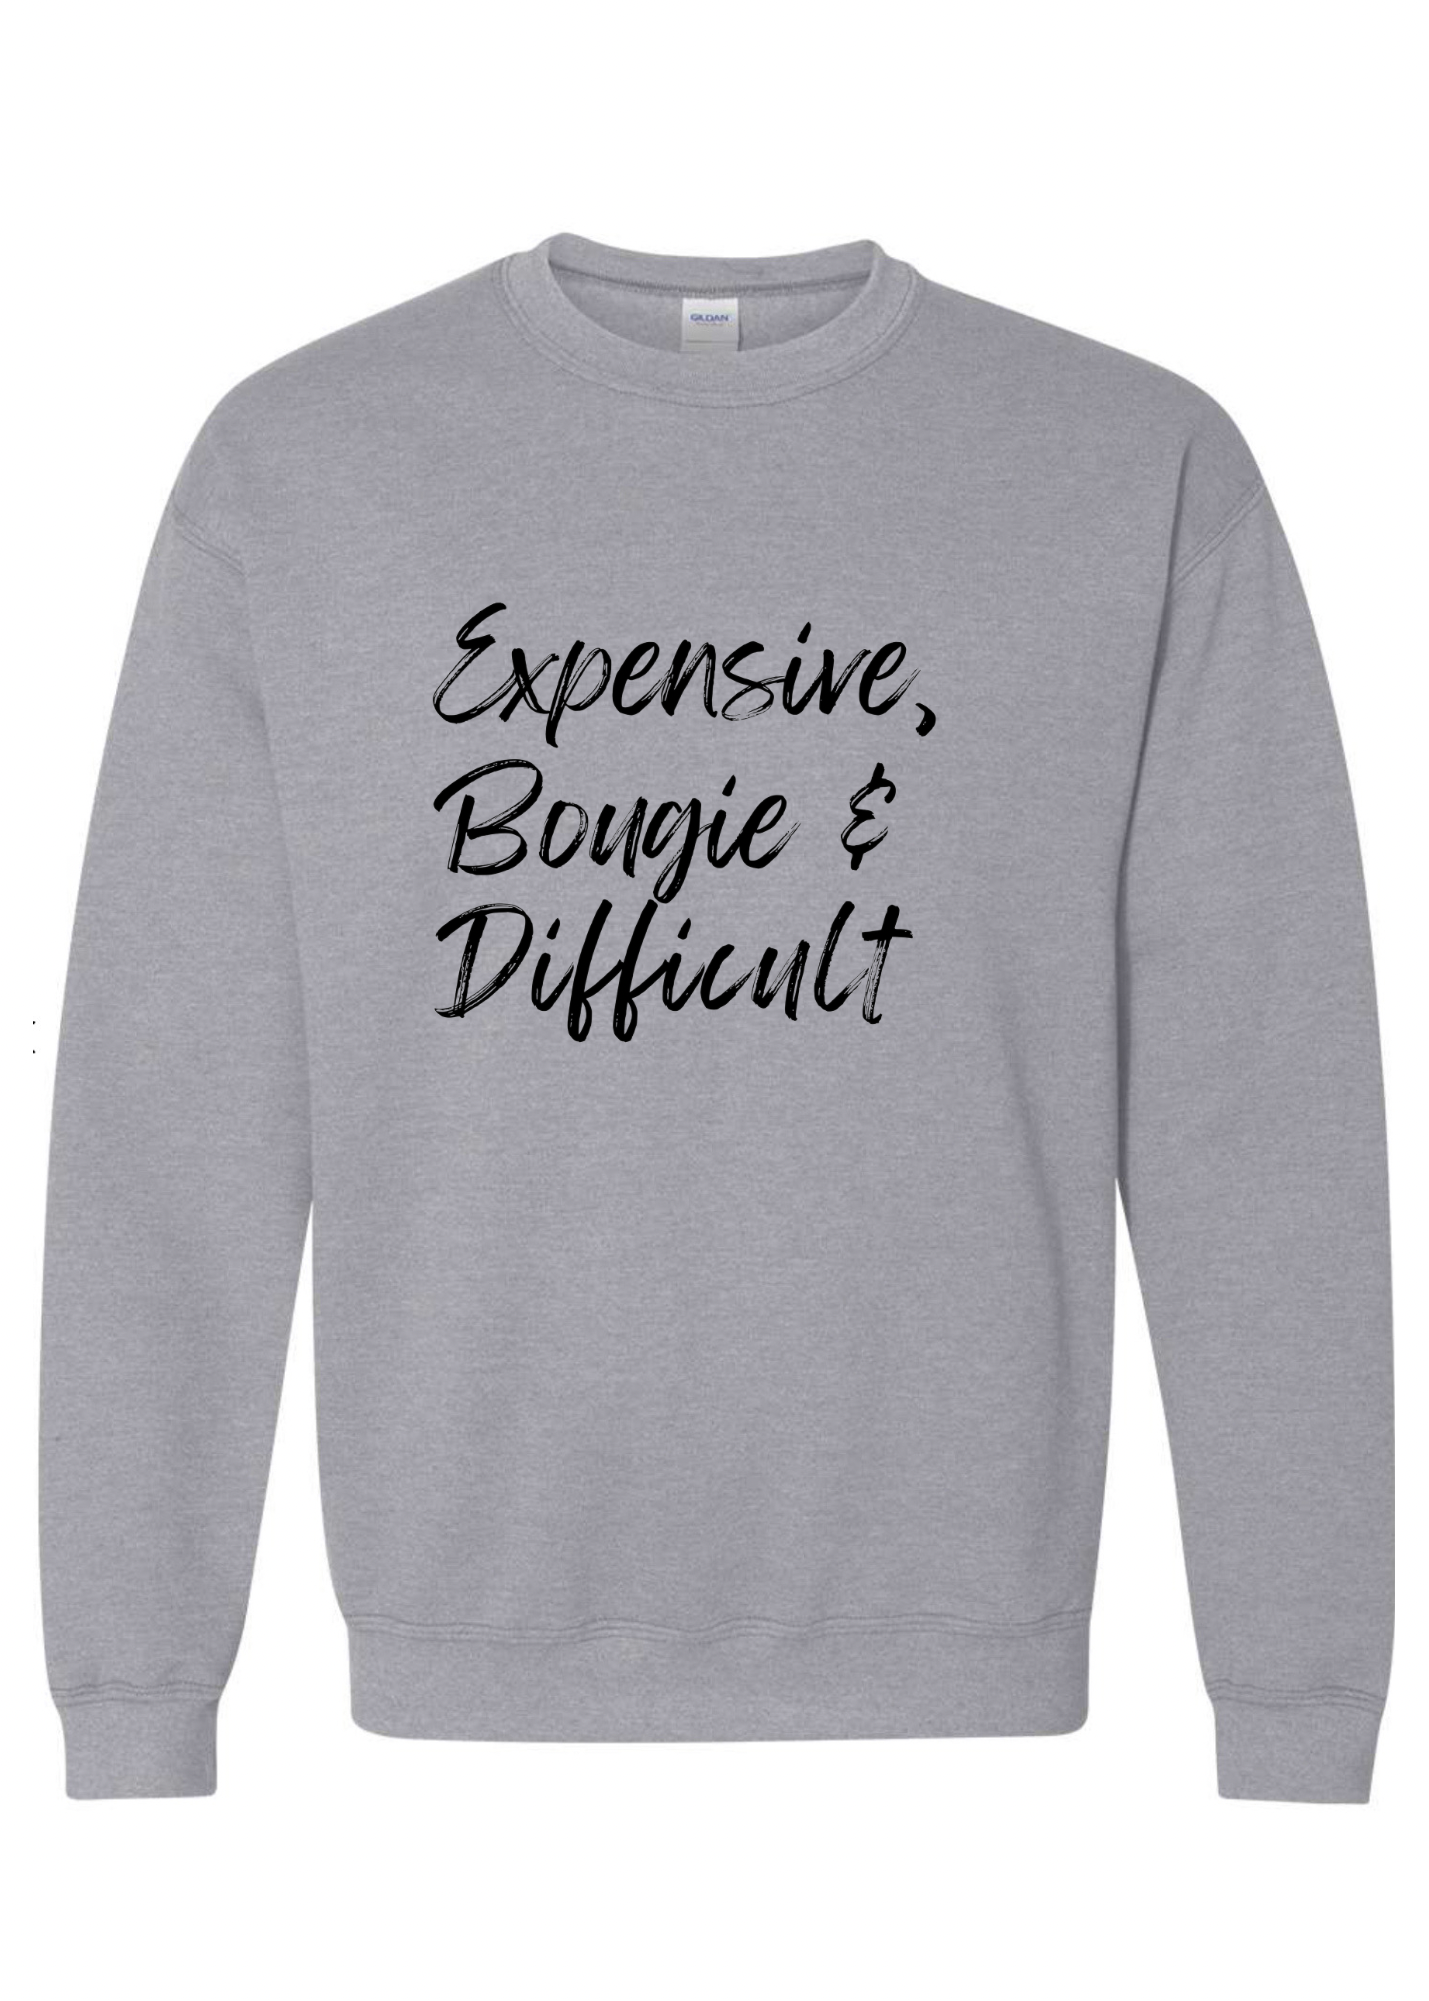 Expensive, Bougie & Difficult Crew Sweatshirt - 3 colors available